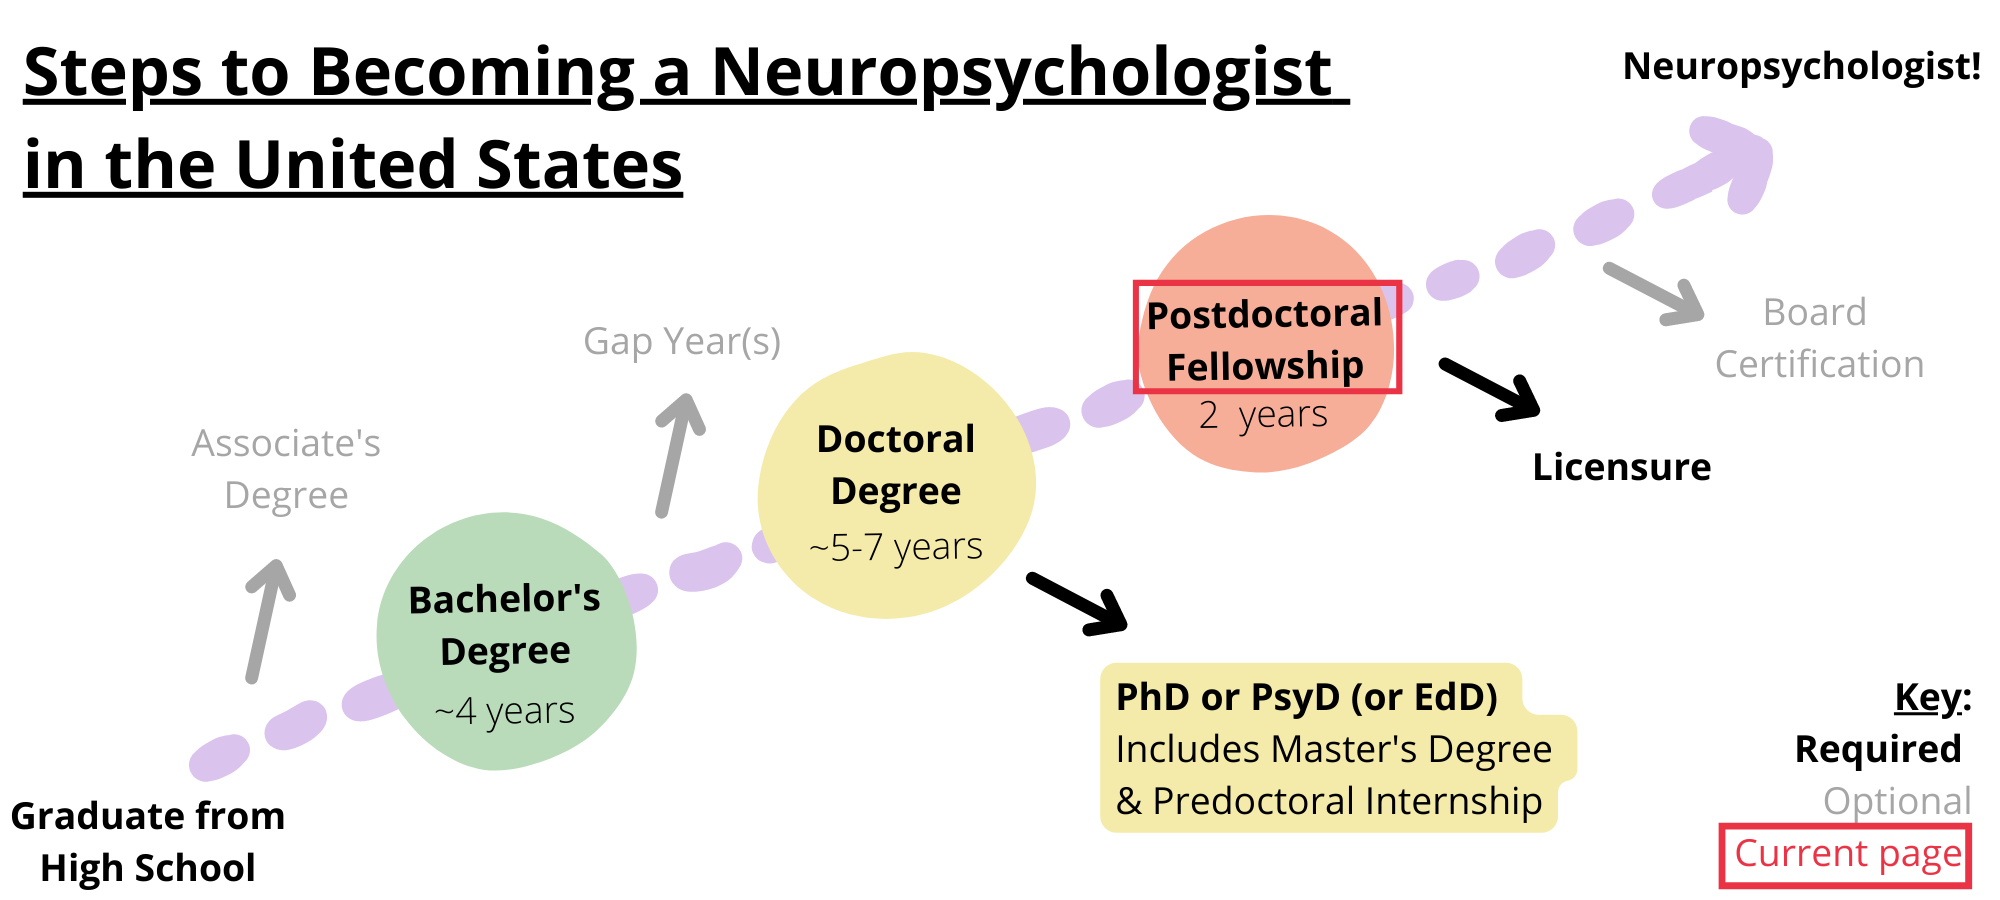 Steps to becoming a neuropsychologist in the United States. Required steps include graduating from high school, obtaining a bachelor’s degree, obtaining a doctoral degree like a PhD, PsyD, or EdD, completing a postdoctoral fellowship, and licensure. Optional steps include obtaining an associate’s degree, taking a gap year, and board certification. You are on the step postdoctoral fellowship